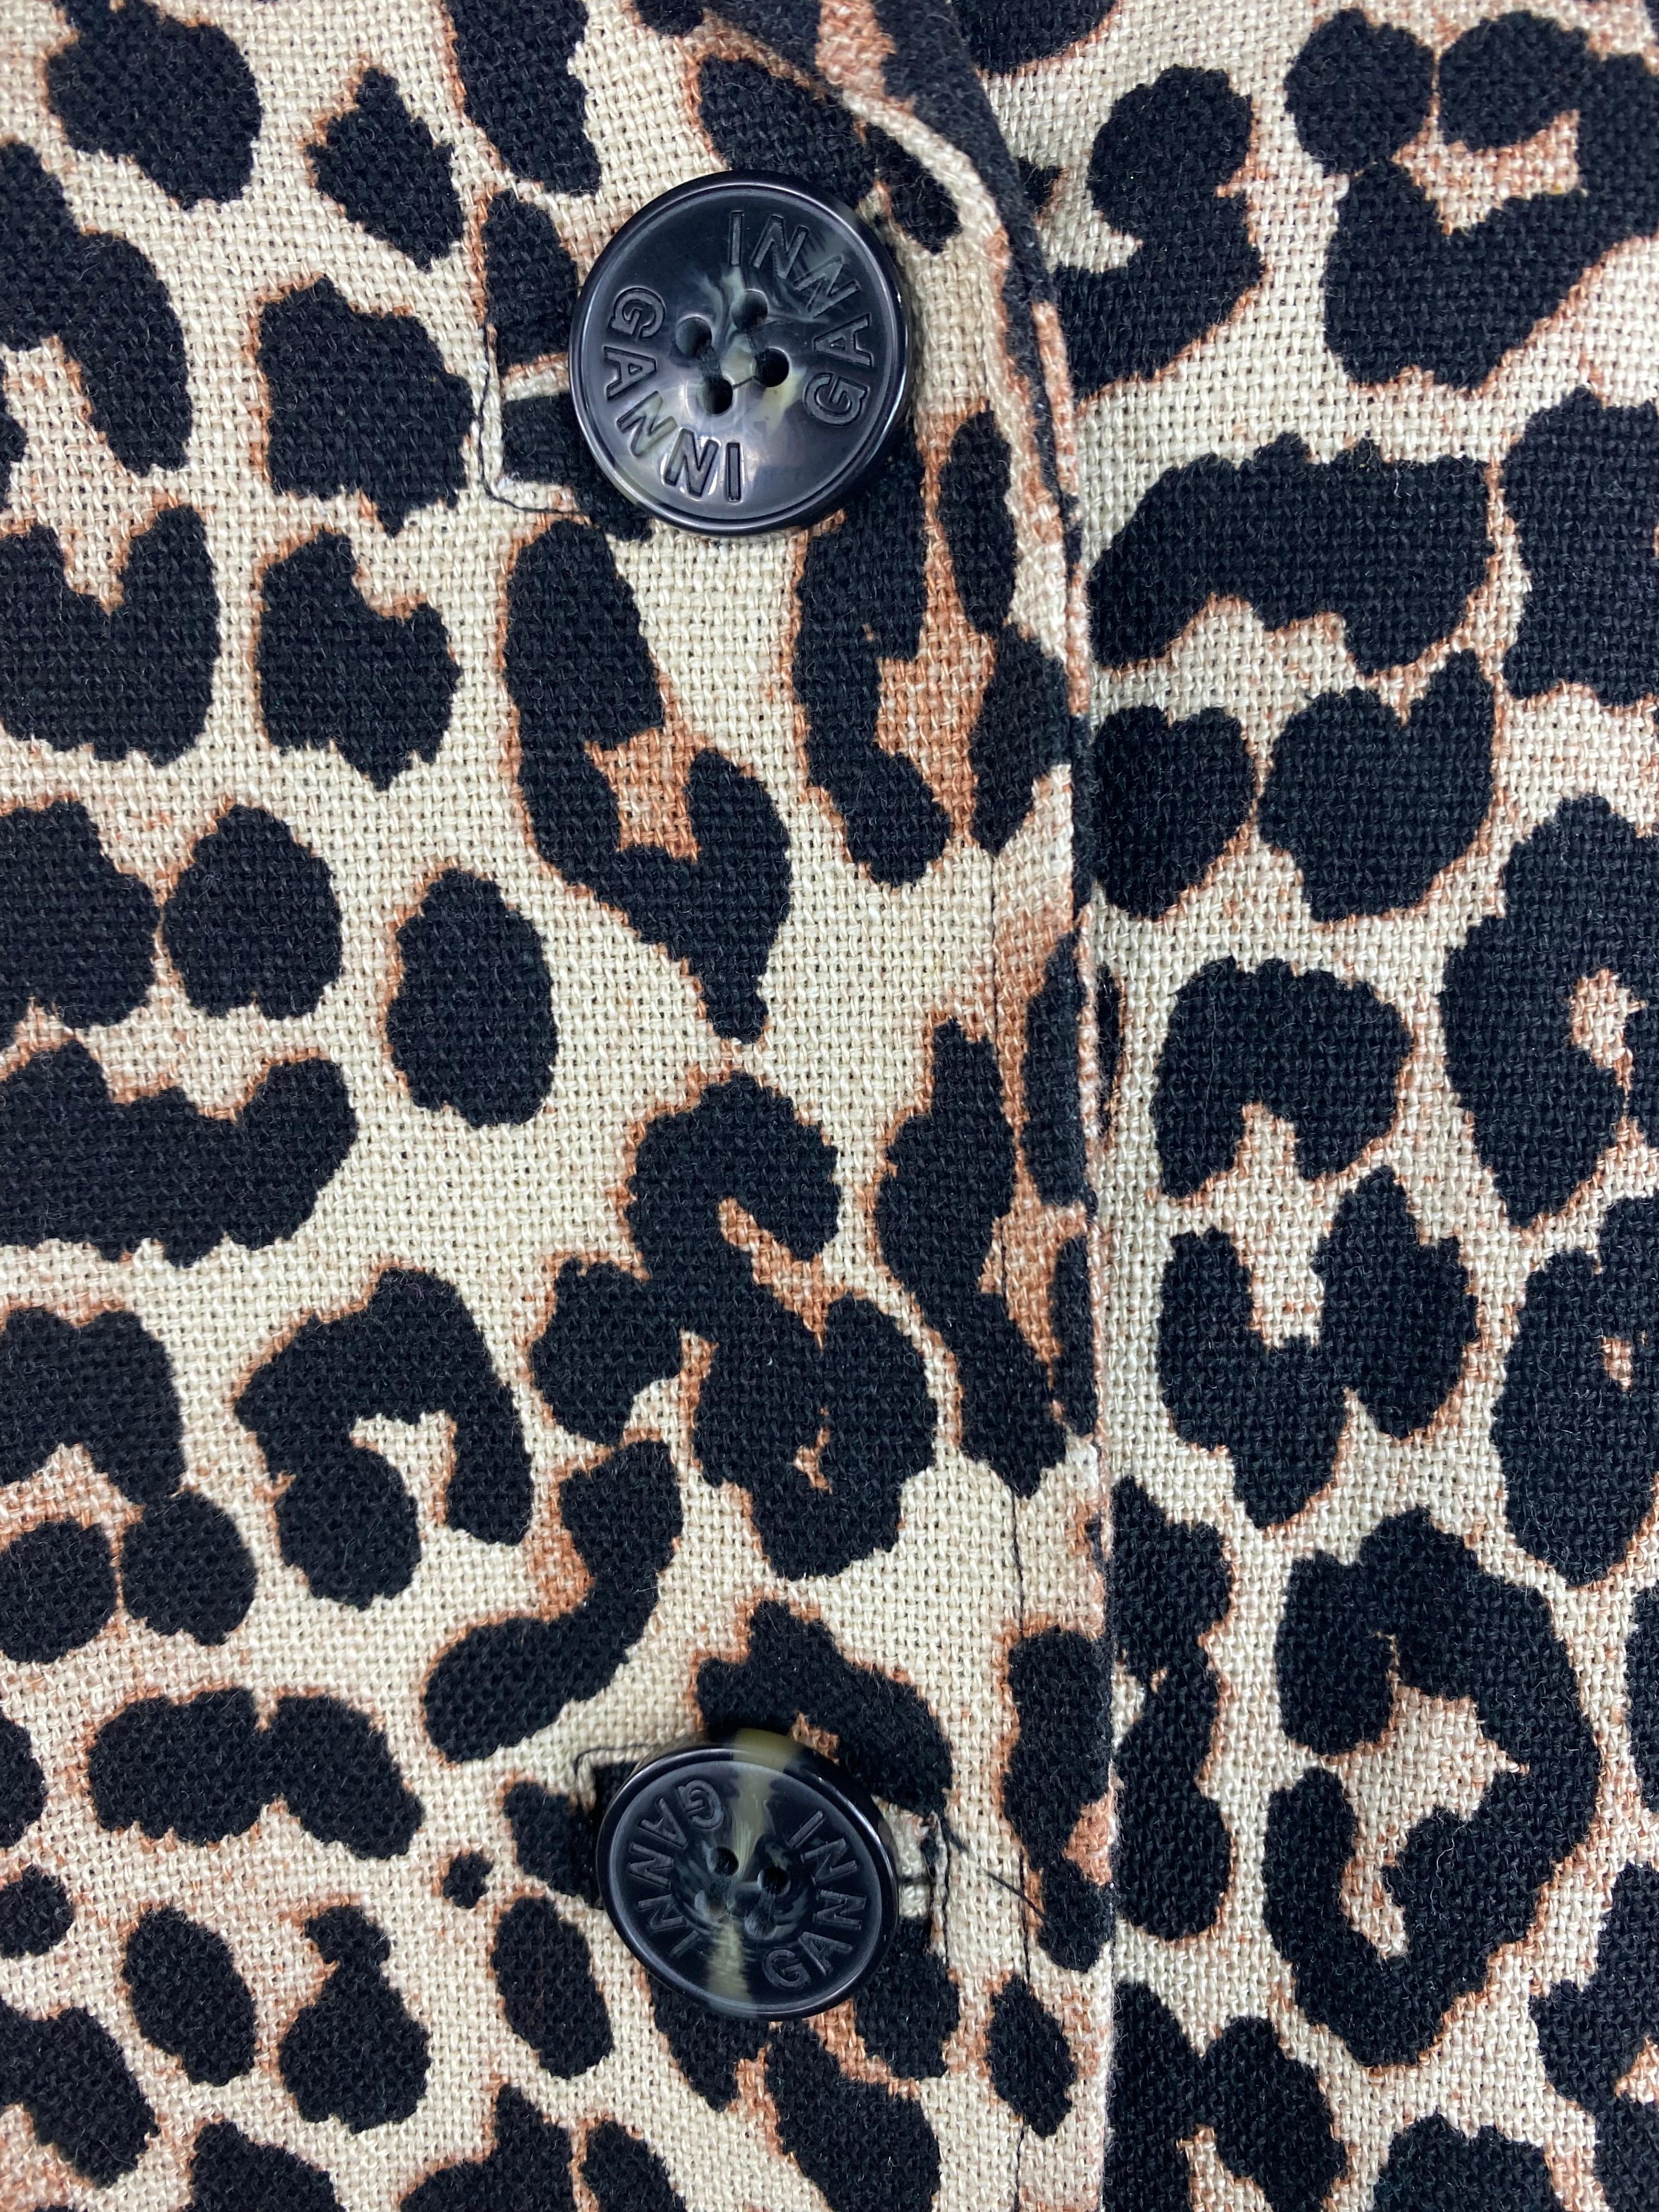 Product details:

The coat features animal print with front button closure, side pockets, 3/4 sleeves length and rear slit detail.